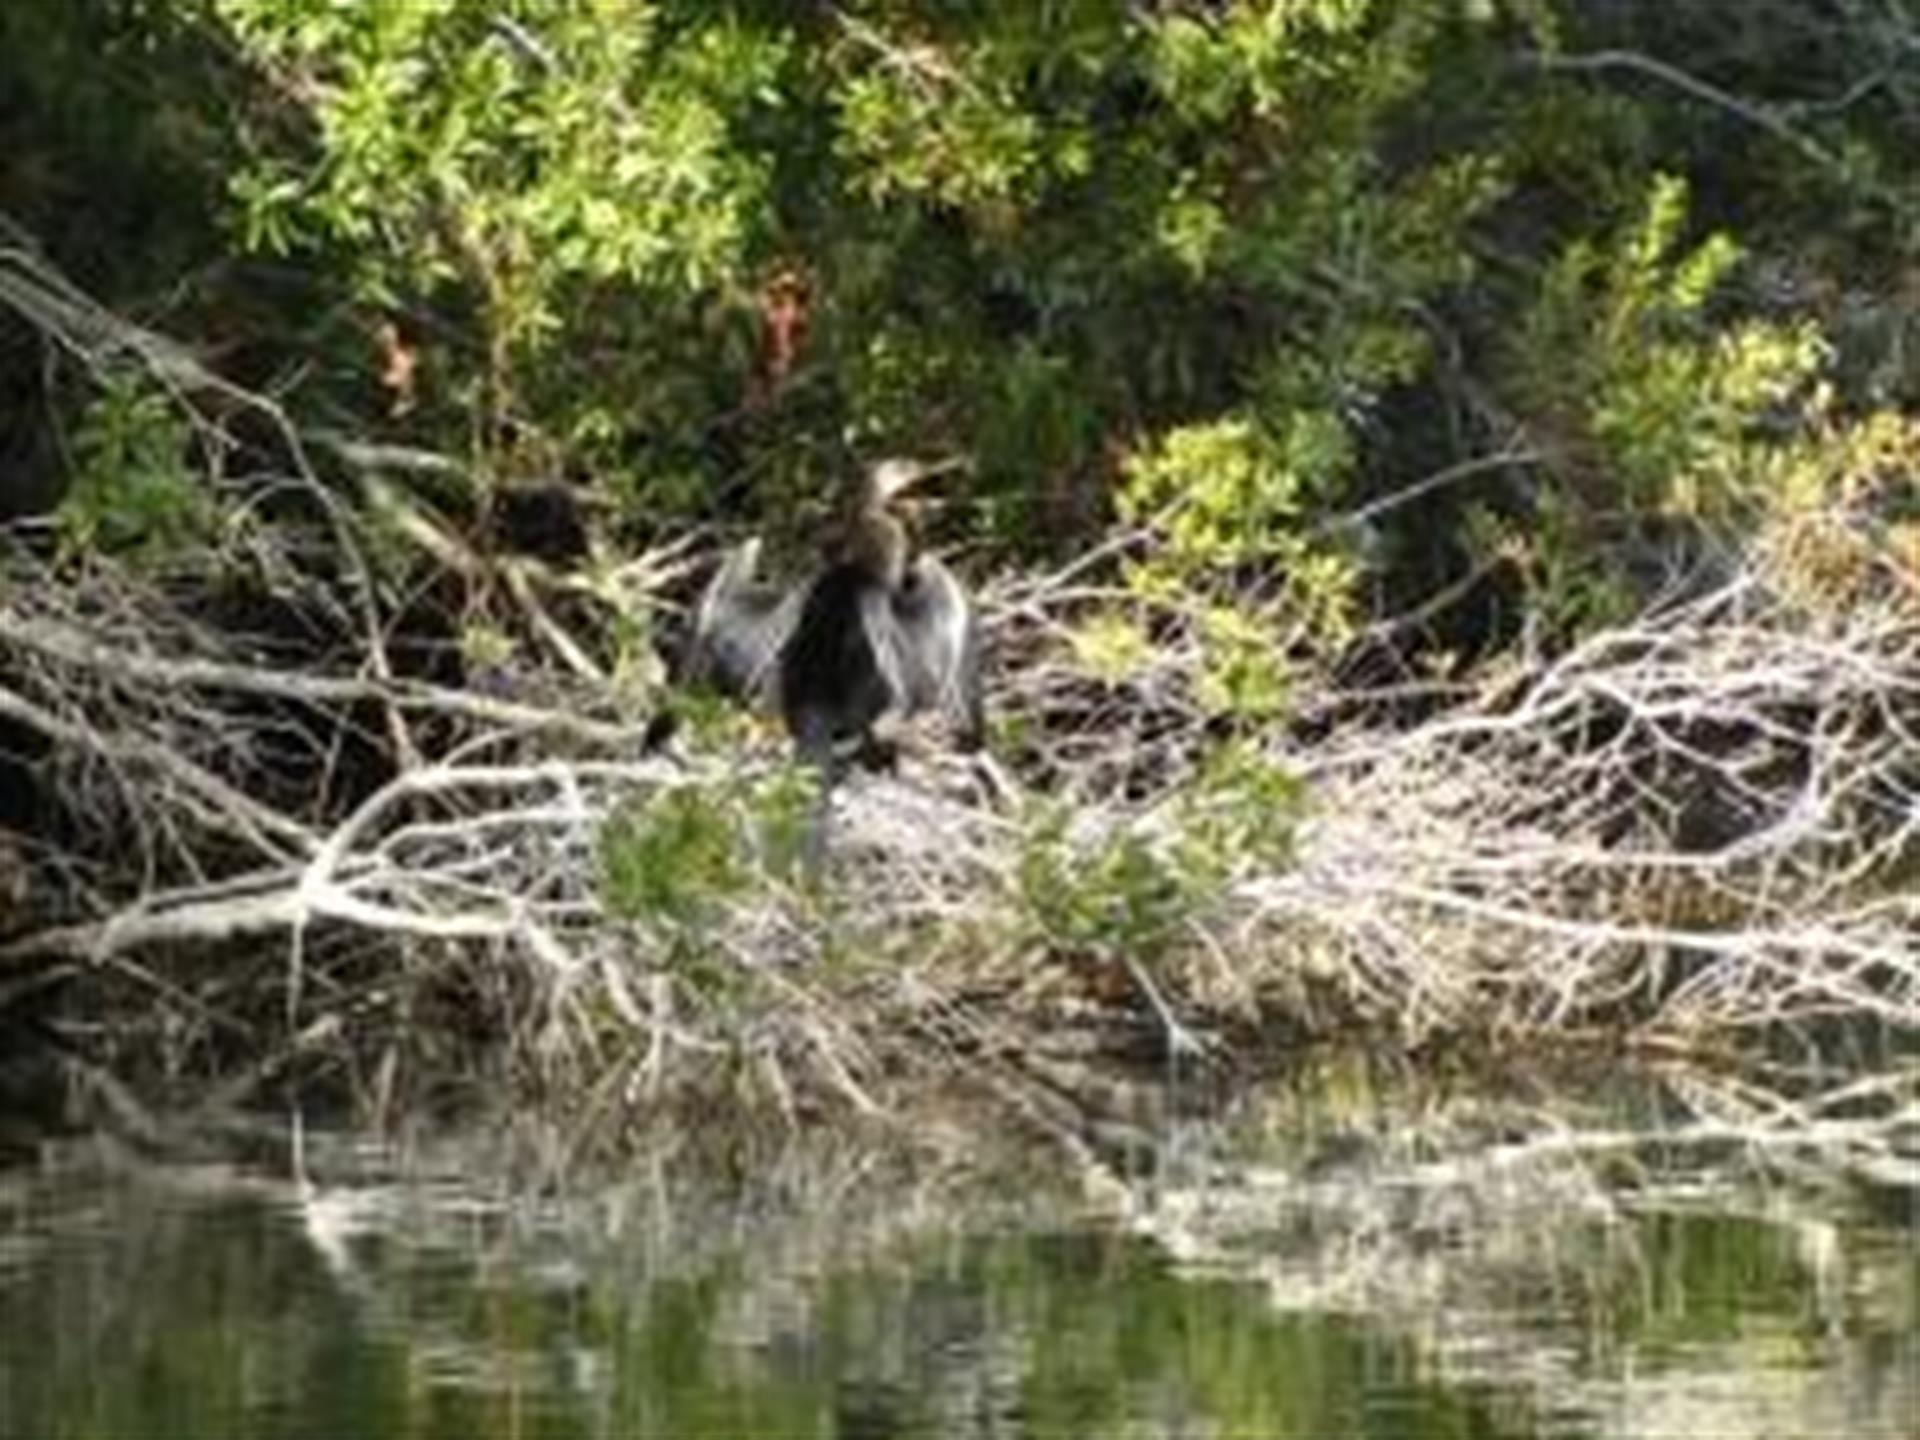 We saw this anhinga at the Conservancy pond on Stede Bonnet Wynd.